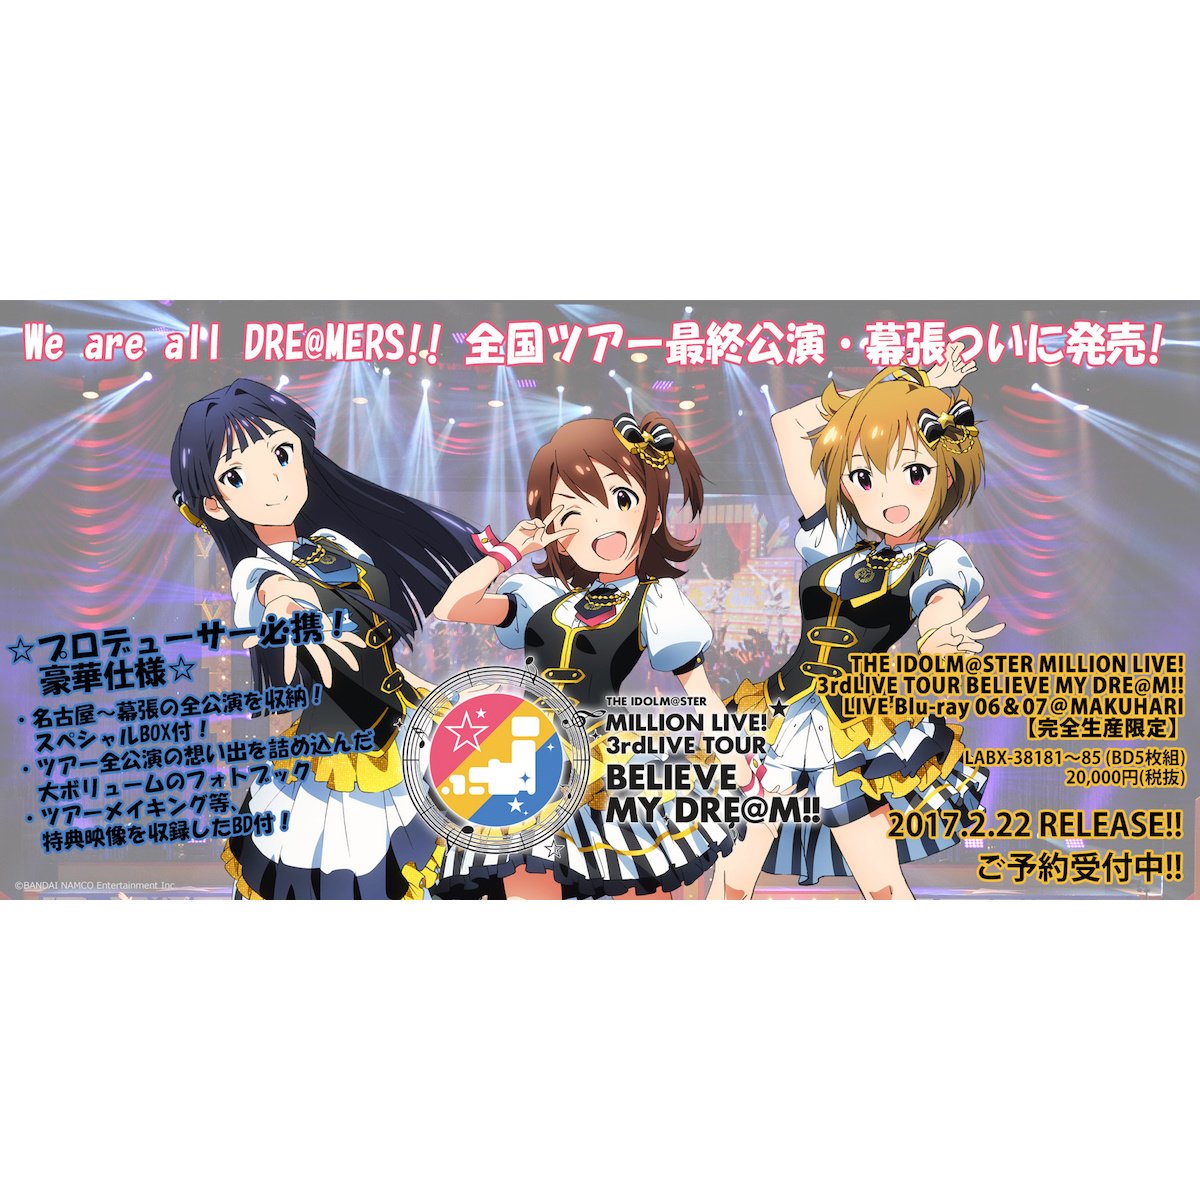 THE IDOLM@STER: Million Live! #11